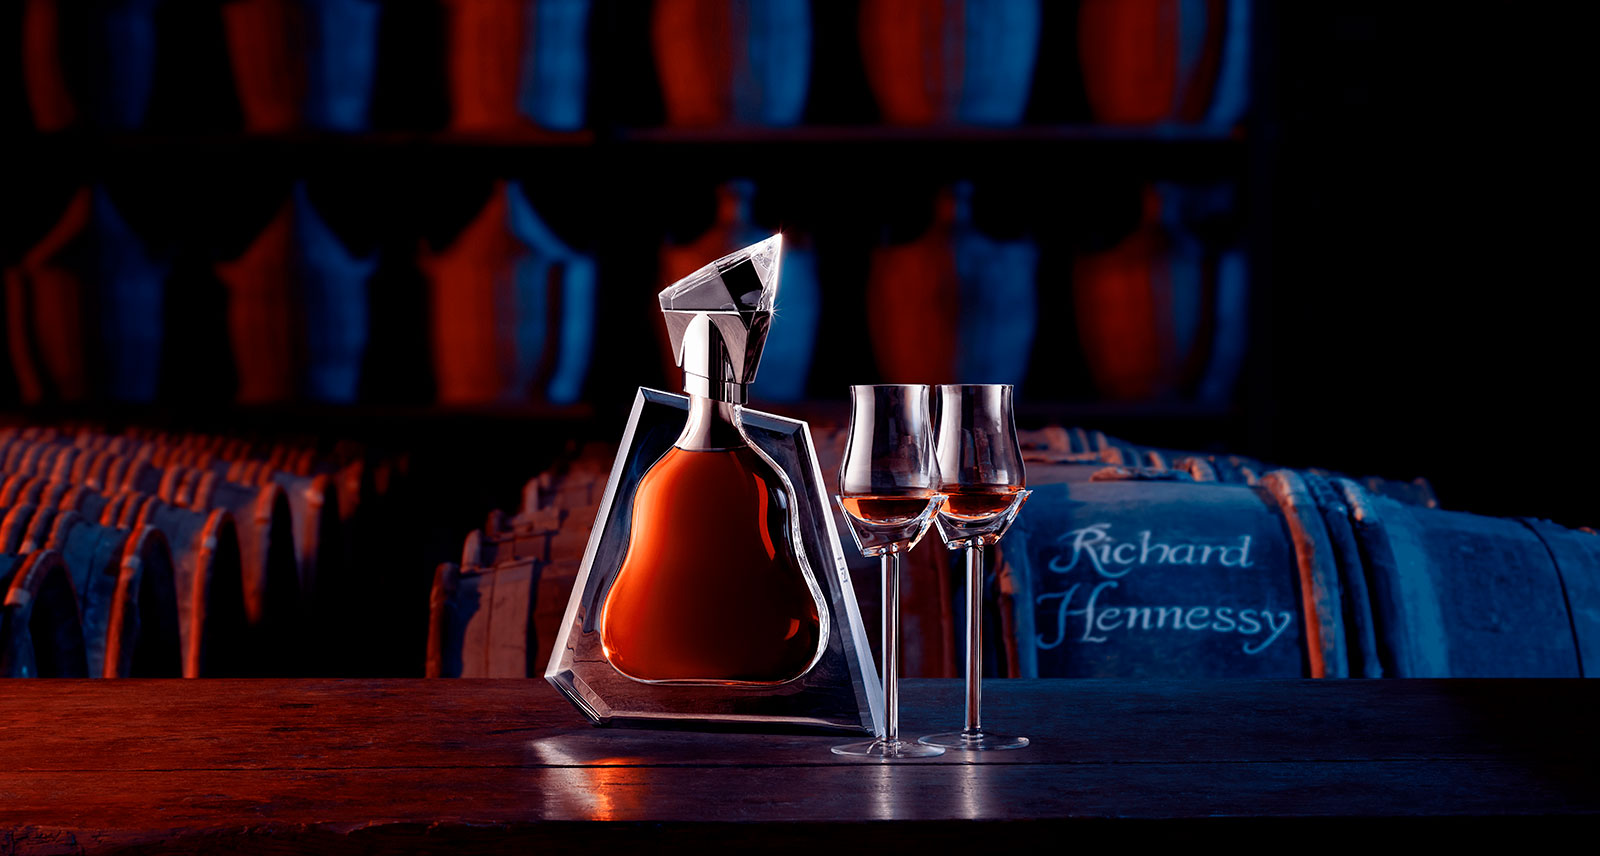 Richard Hennessy feature